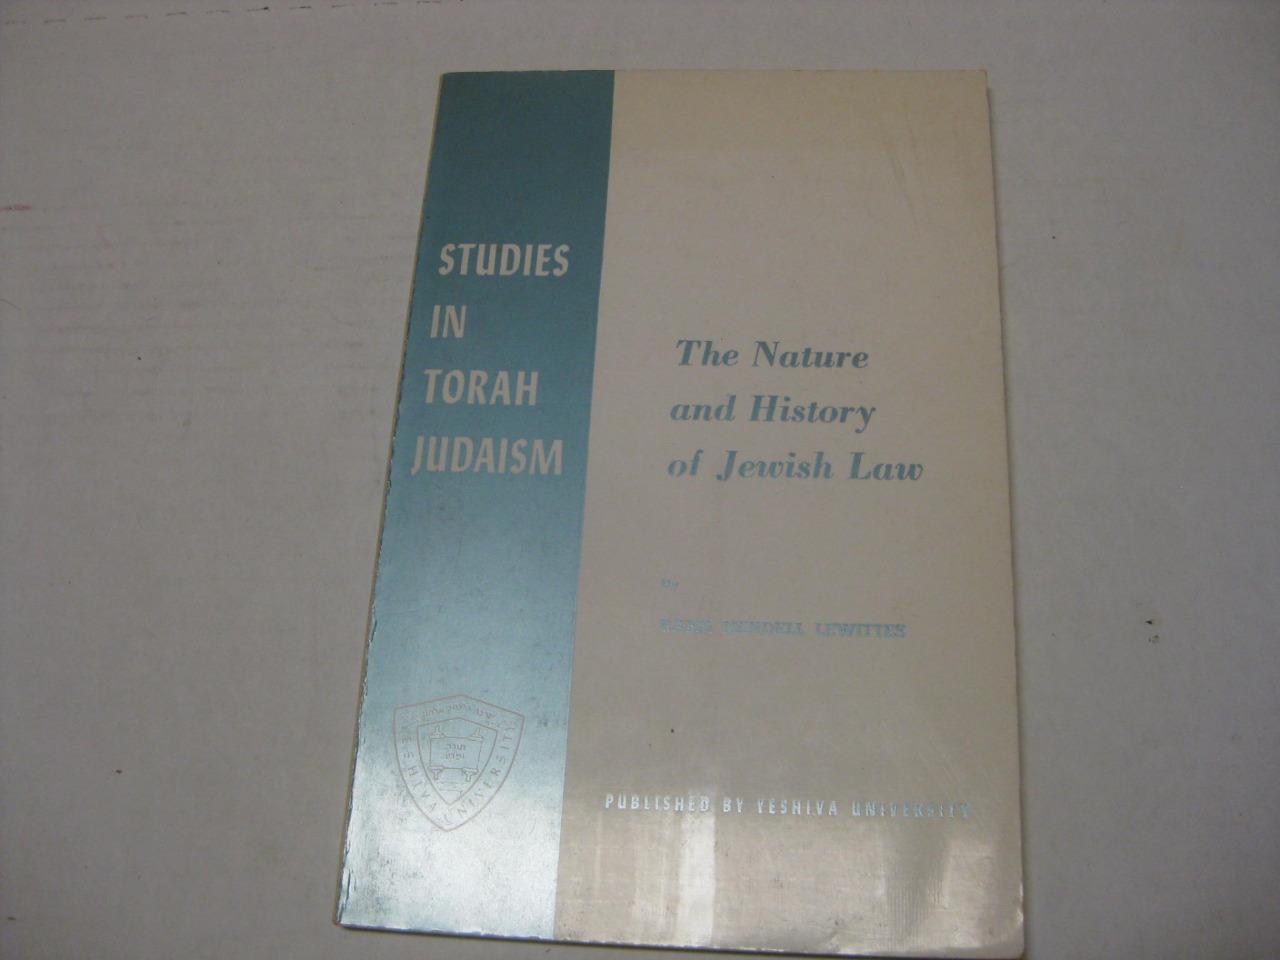 The Nature and History of Jewish Law by Mendel Lewittes